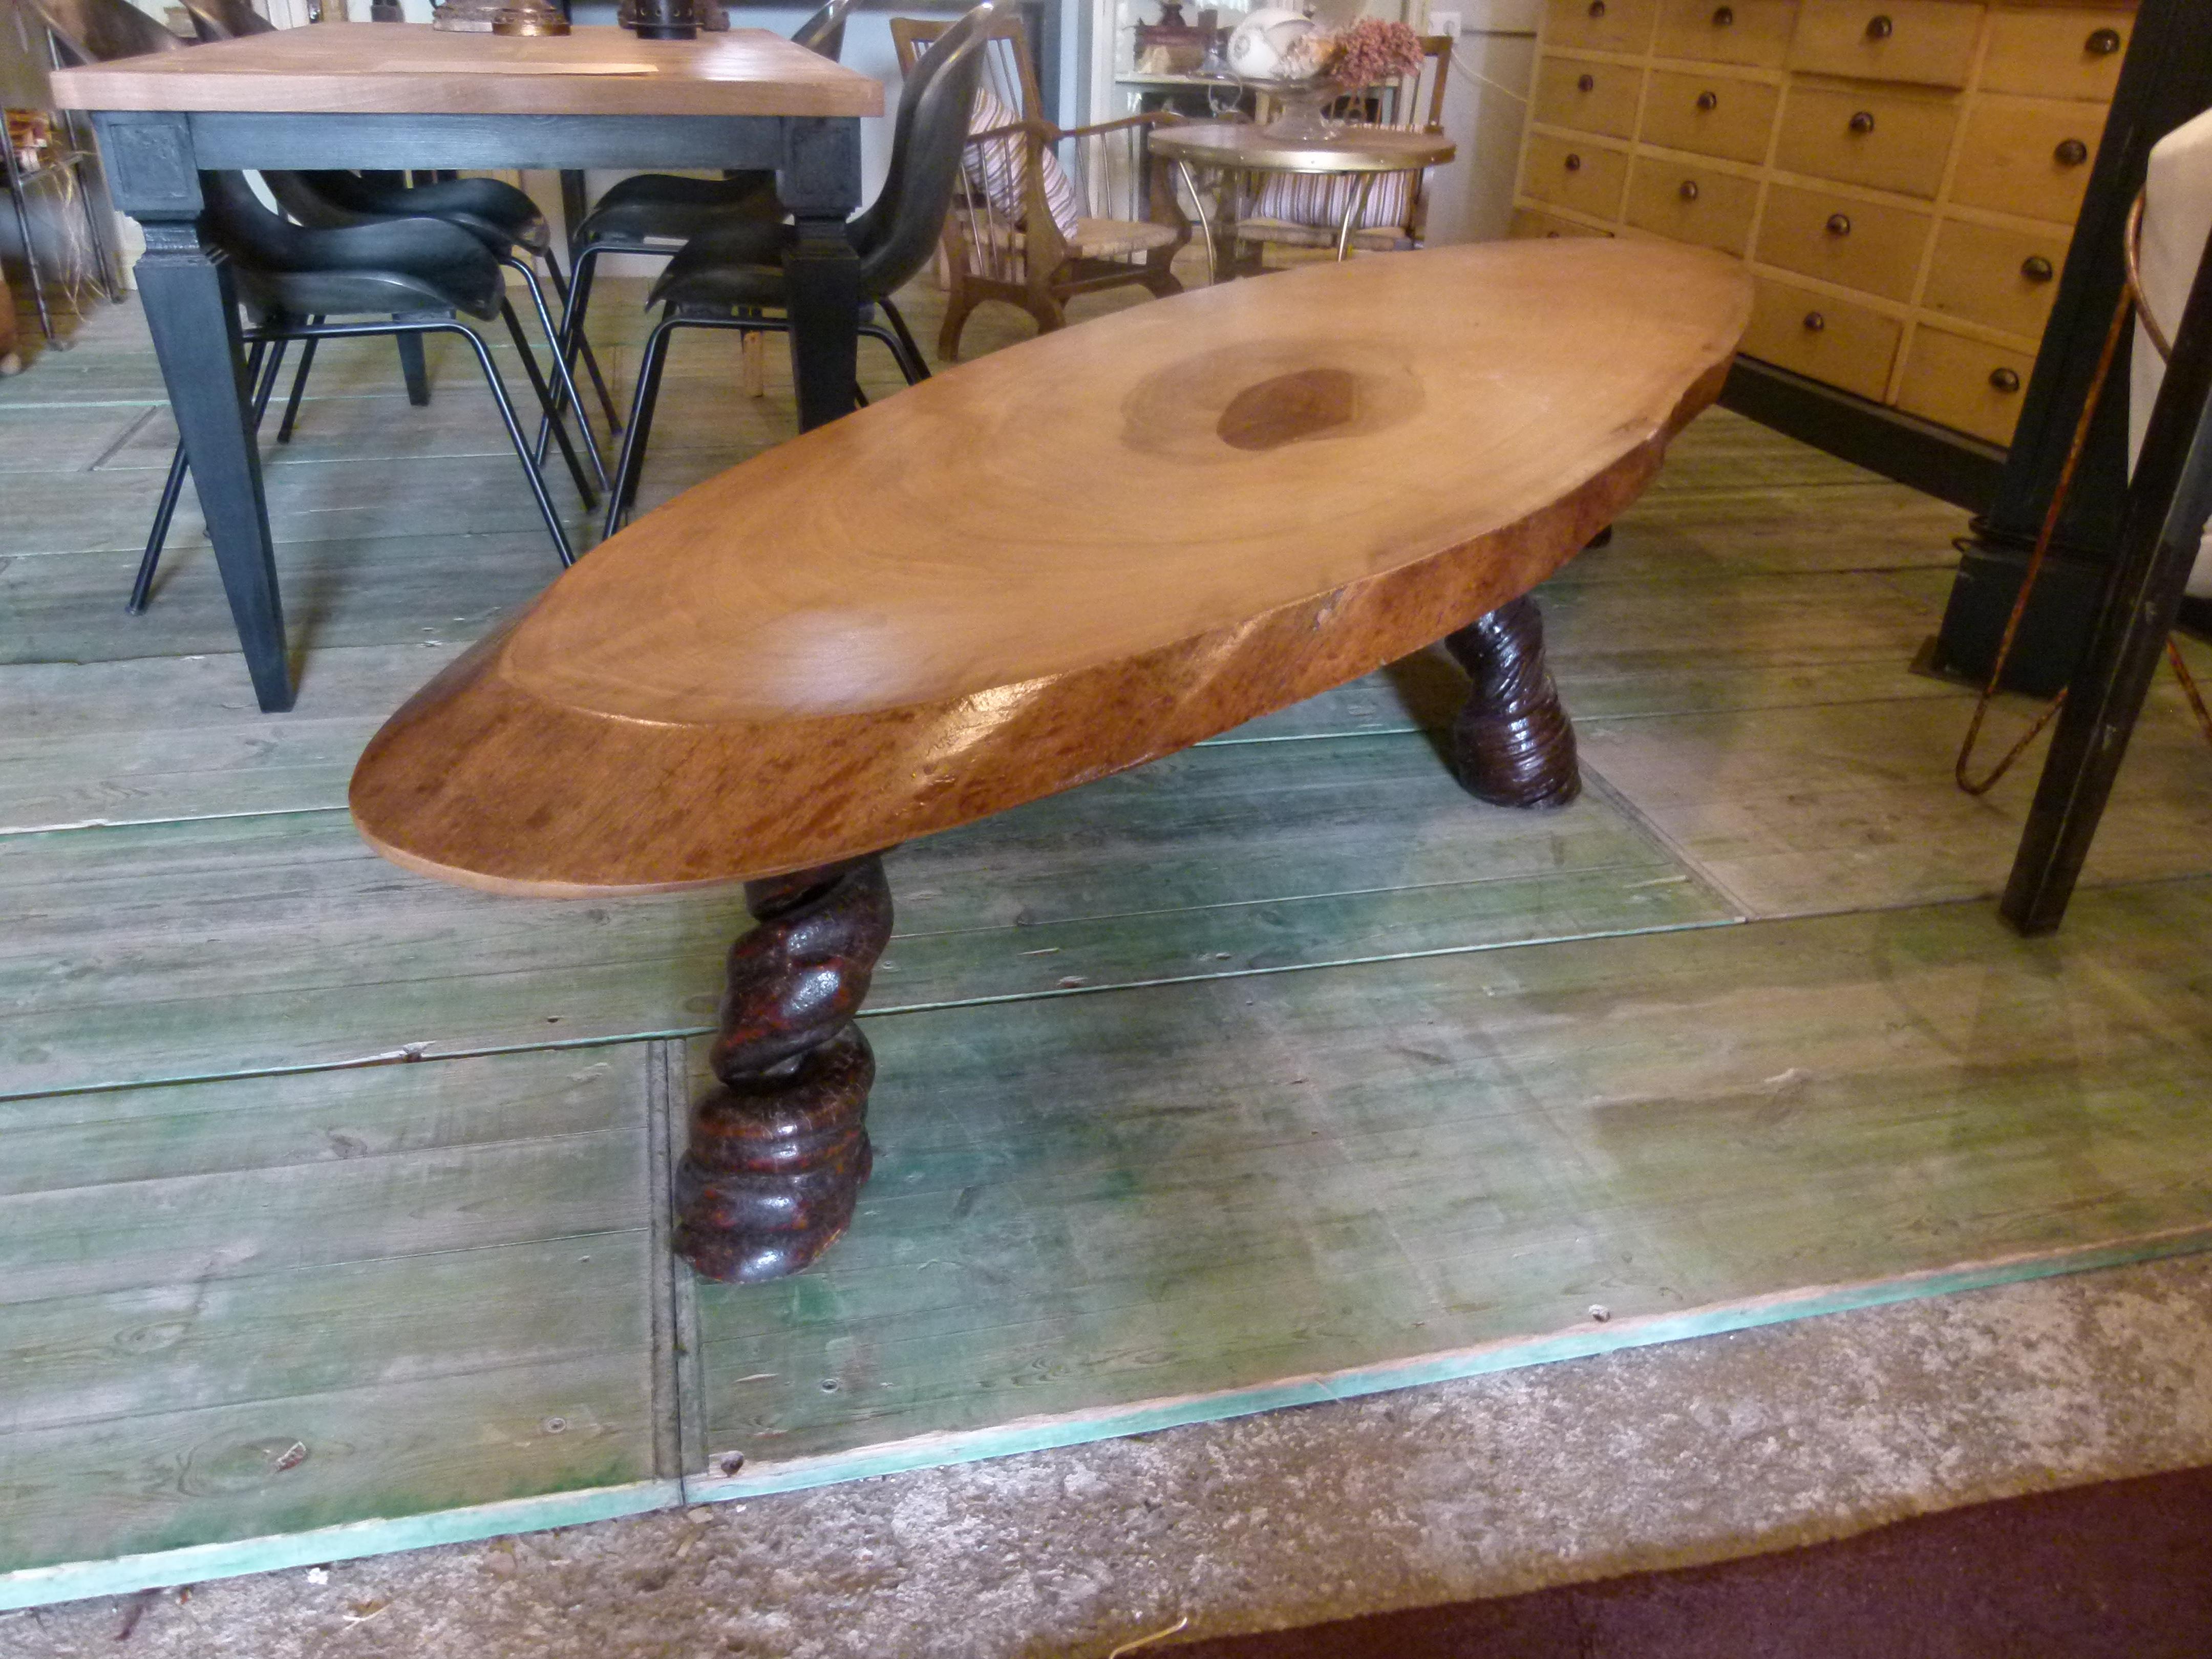 Incredible table from Congo. Made from Baobab's wood and legs from Liana.
Baobabs reach heights of 5 to 30 m (16 to 98 ft) and have trunk diameters of 7 to 11 m (23 to 36 ft).Baobabs store water in the trunk (up to 120,000 liters or 32,000 US